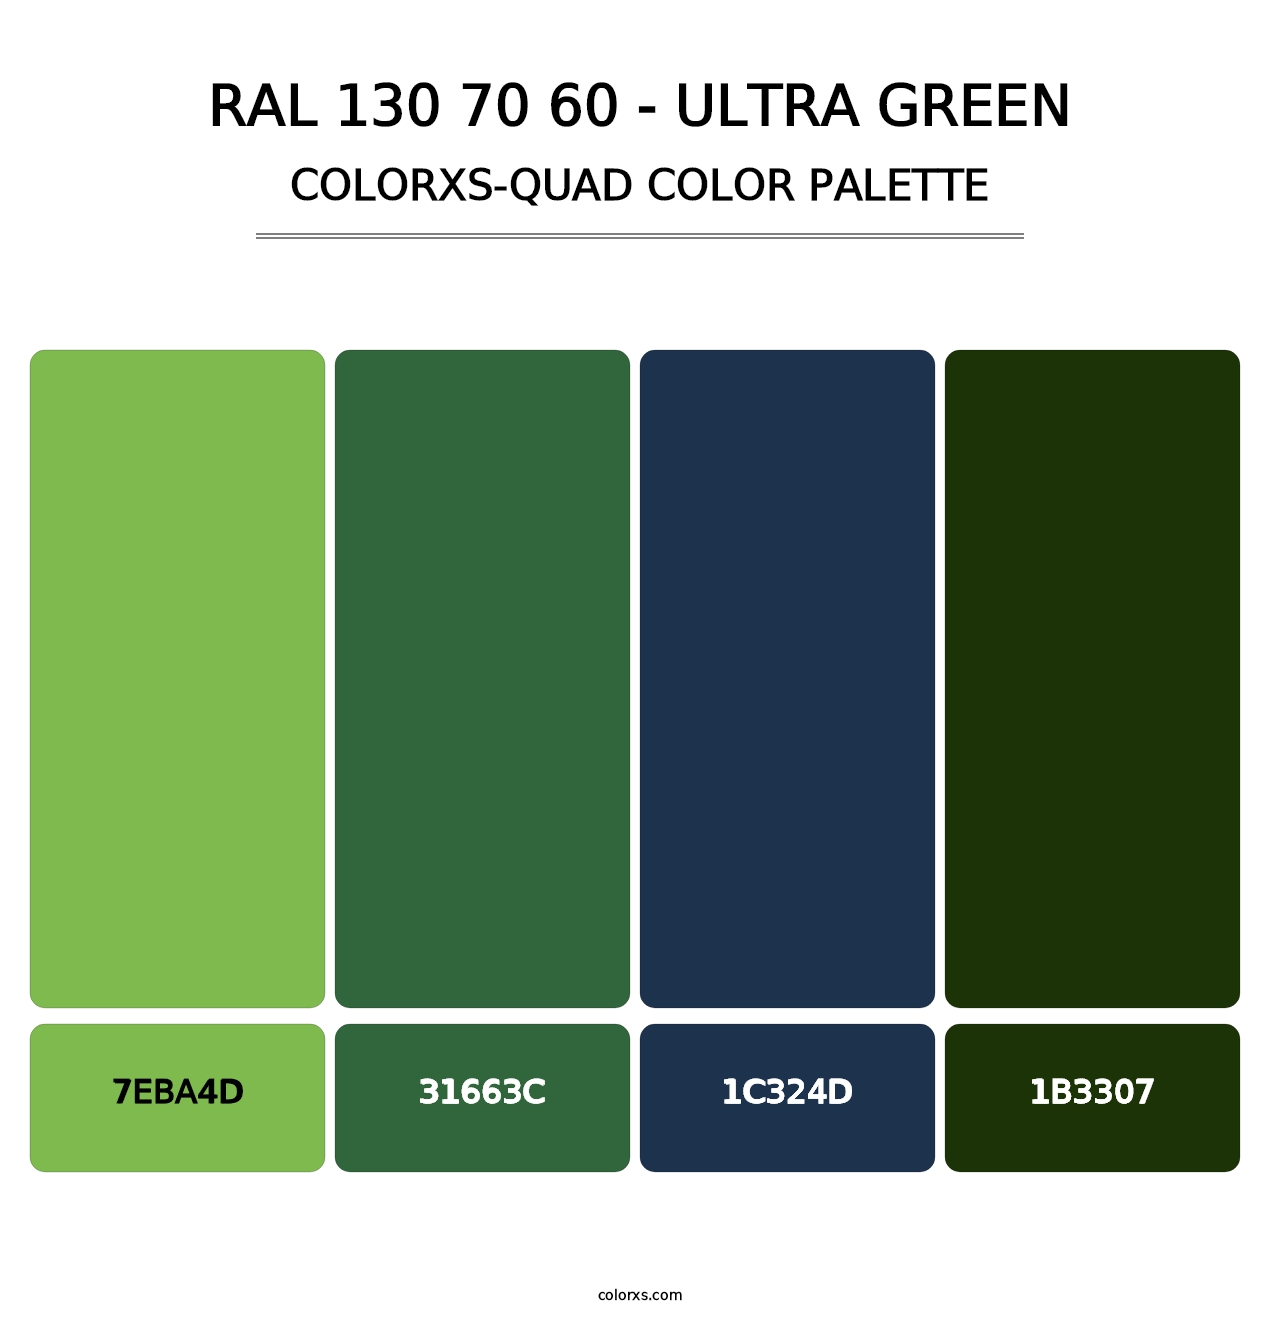 RAL 130 70 60 - Ultra Green - Colorxs Quad Palette